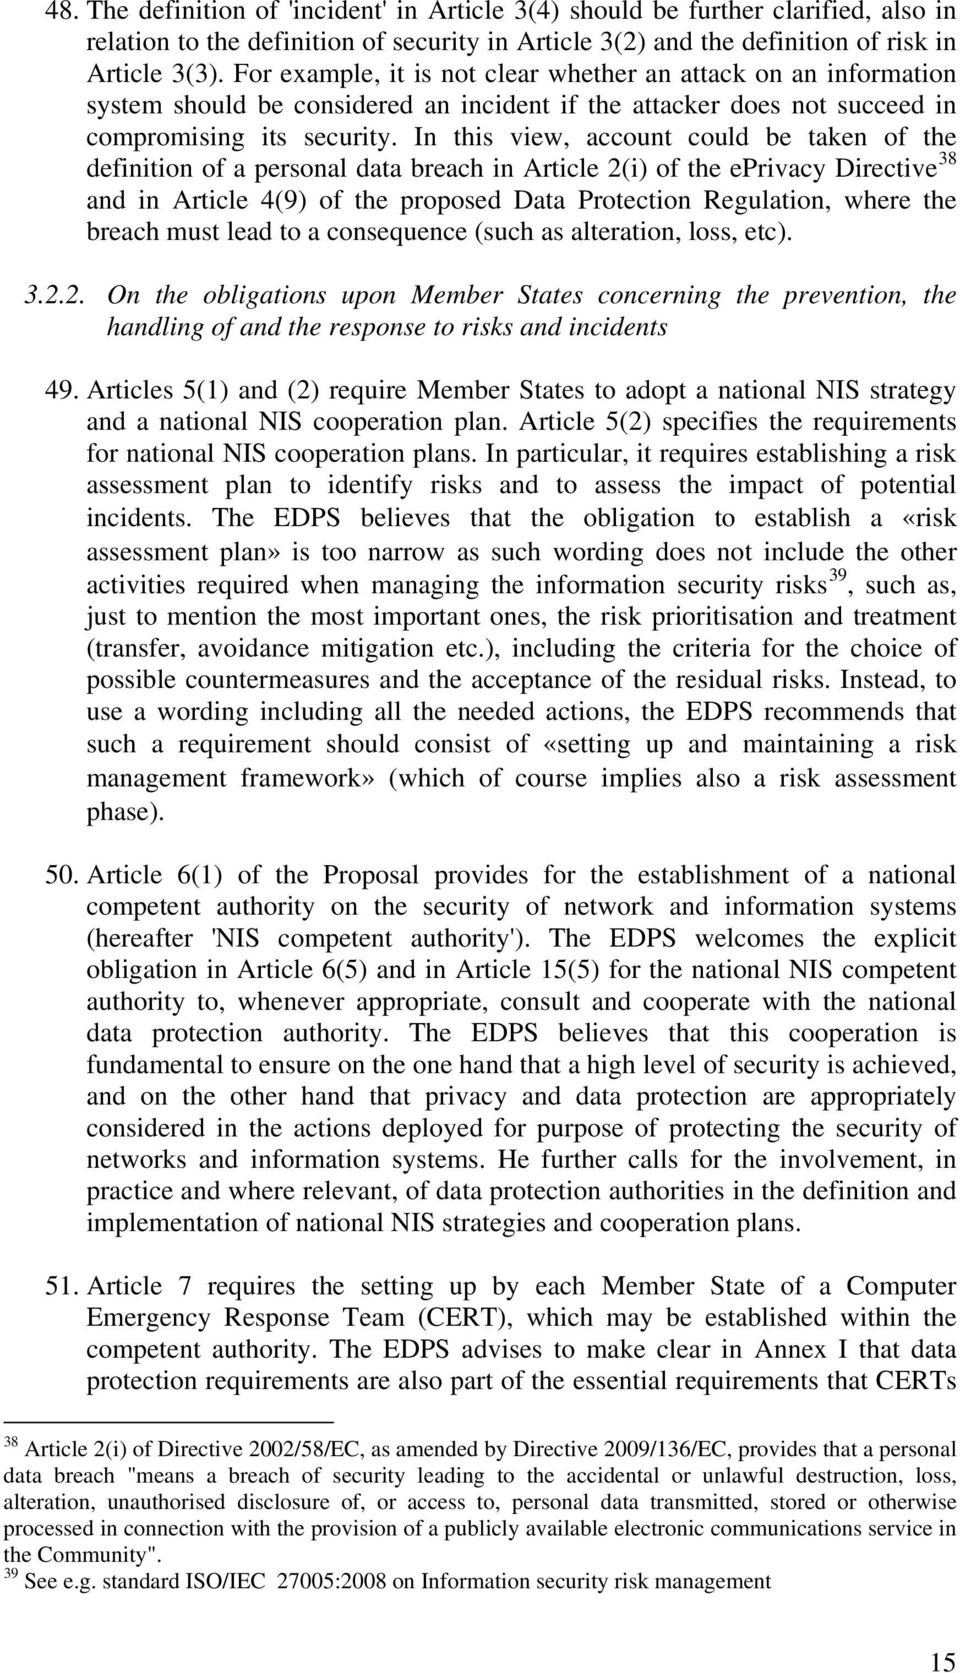 In this view, account could be taken of the definition of a personal data breach in Article 2(i) of the eprivacy Directive 38 and in Article 4(9) of the proposed Data Protection Regulation, where the